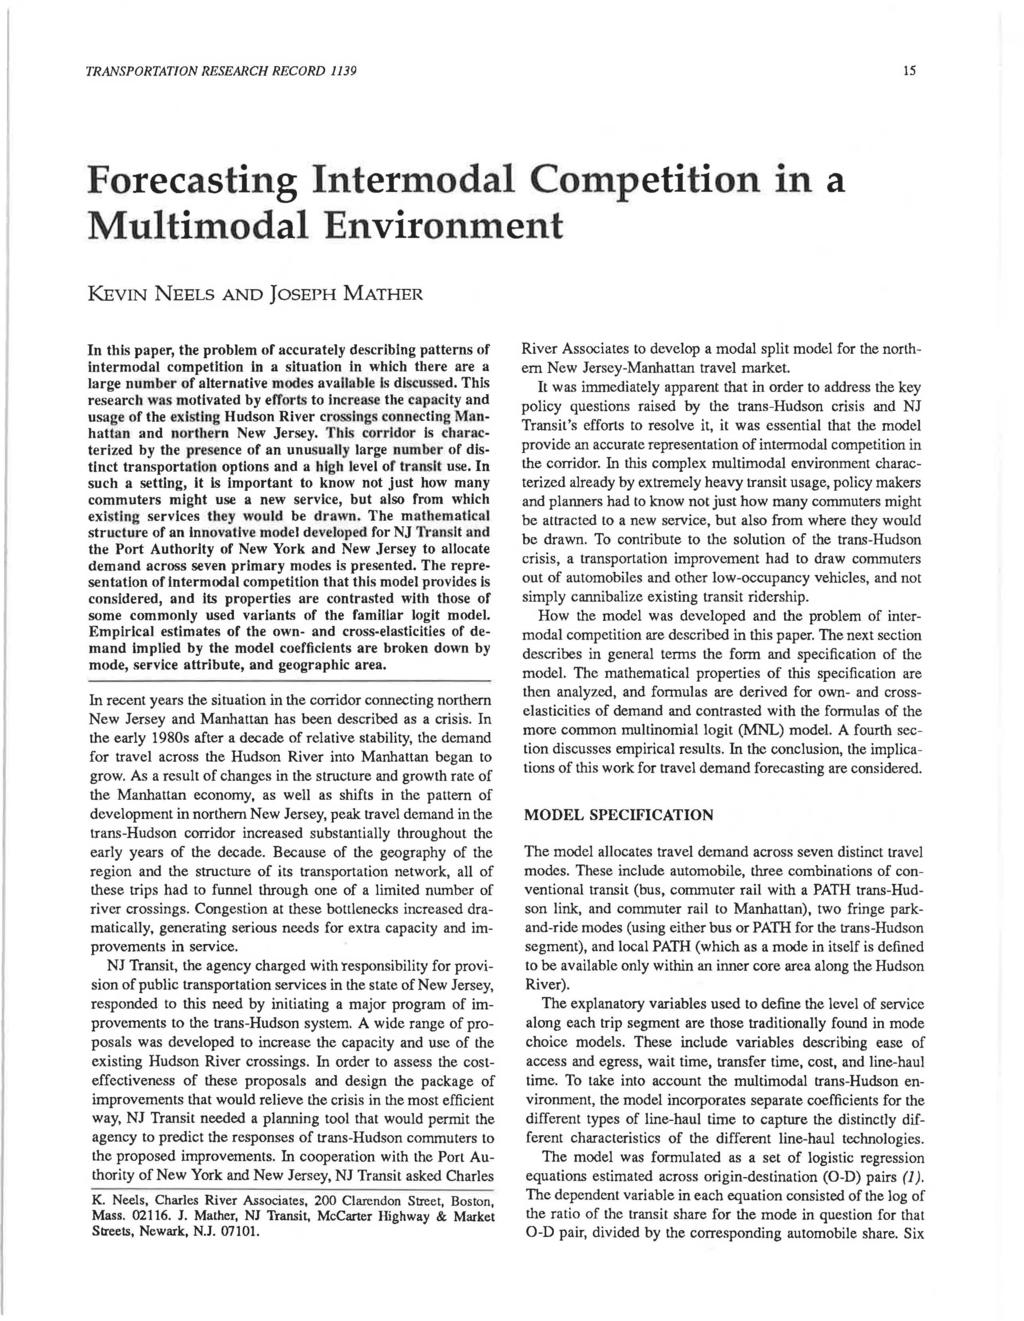 TRANSPORTATION RESEARCH RECORD 1139 15 Forecasting Intermodal Competition in a Multimodal Environment KEVIN NEELS AND JOSEPH MATHER In this paper, the problem or accurately describing patterns of